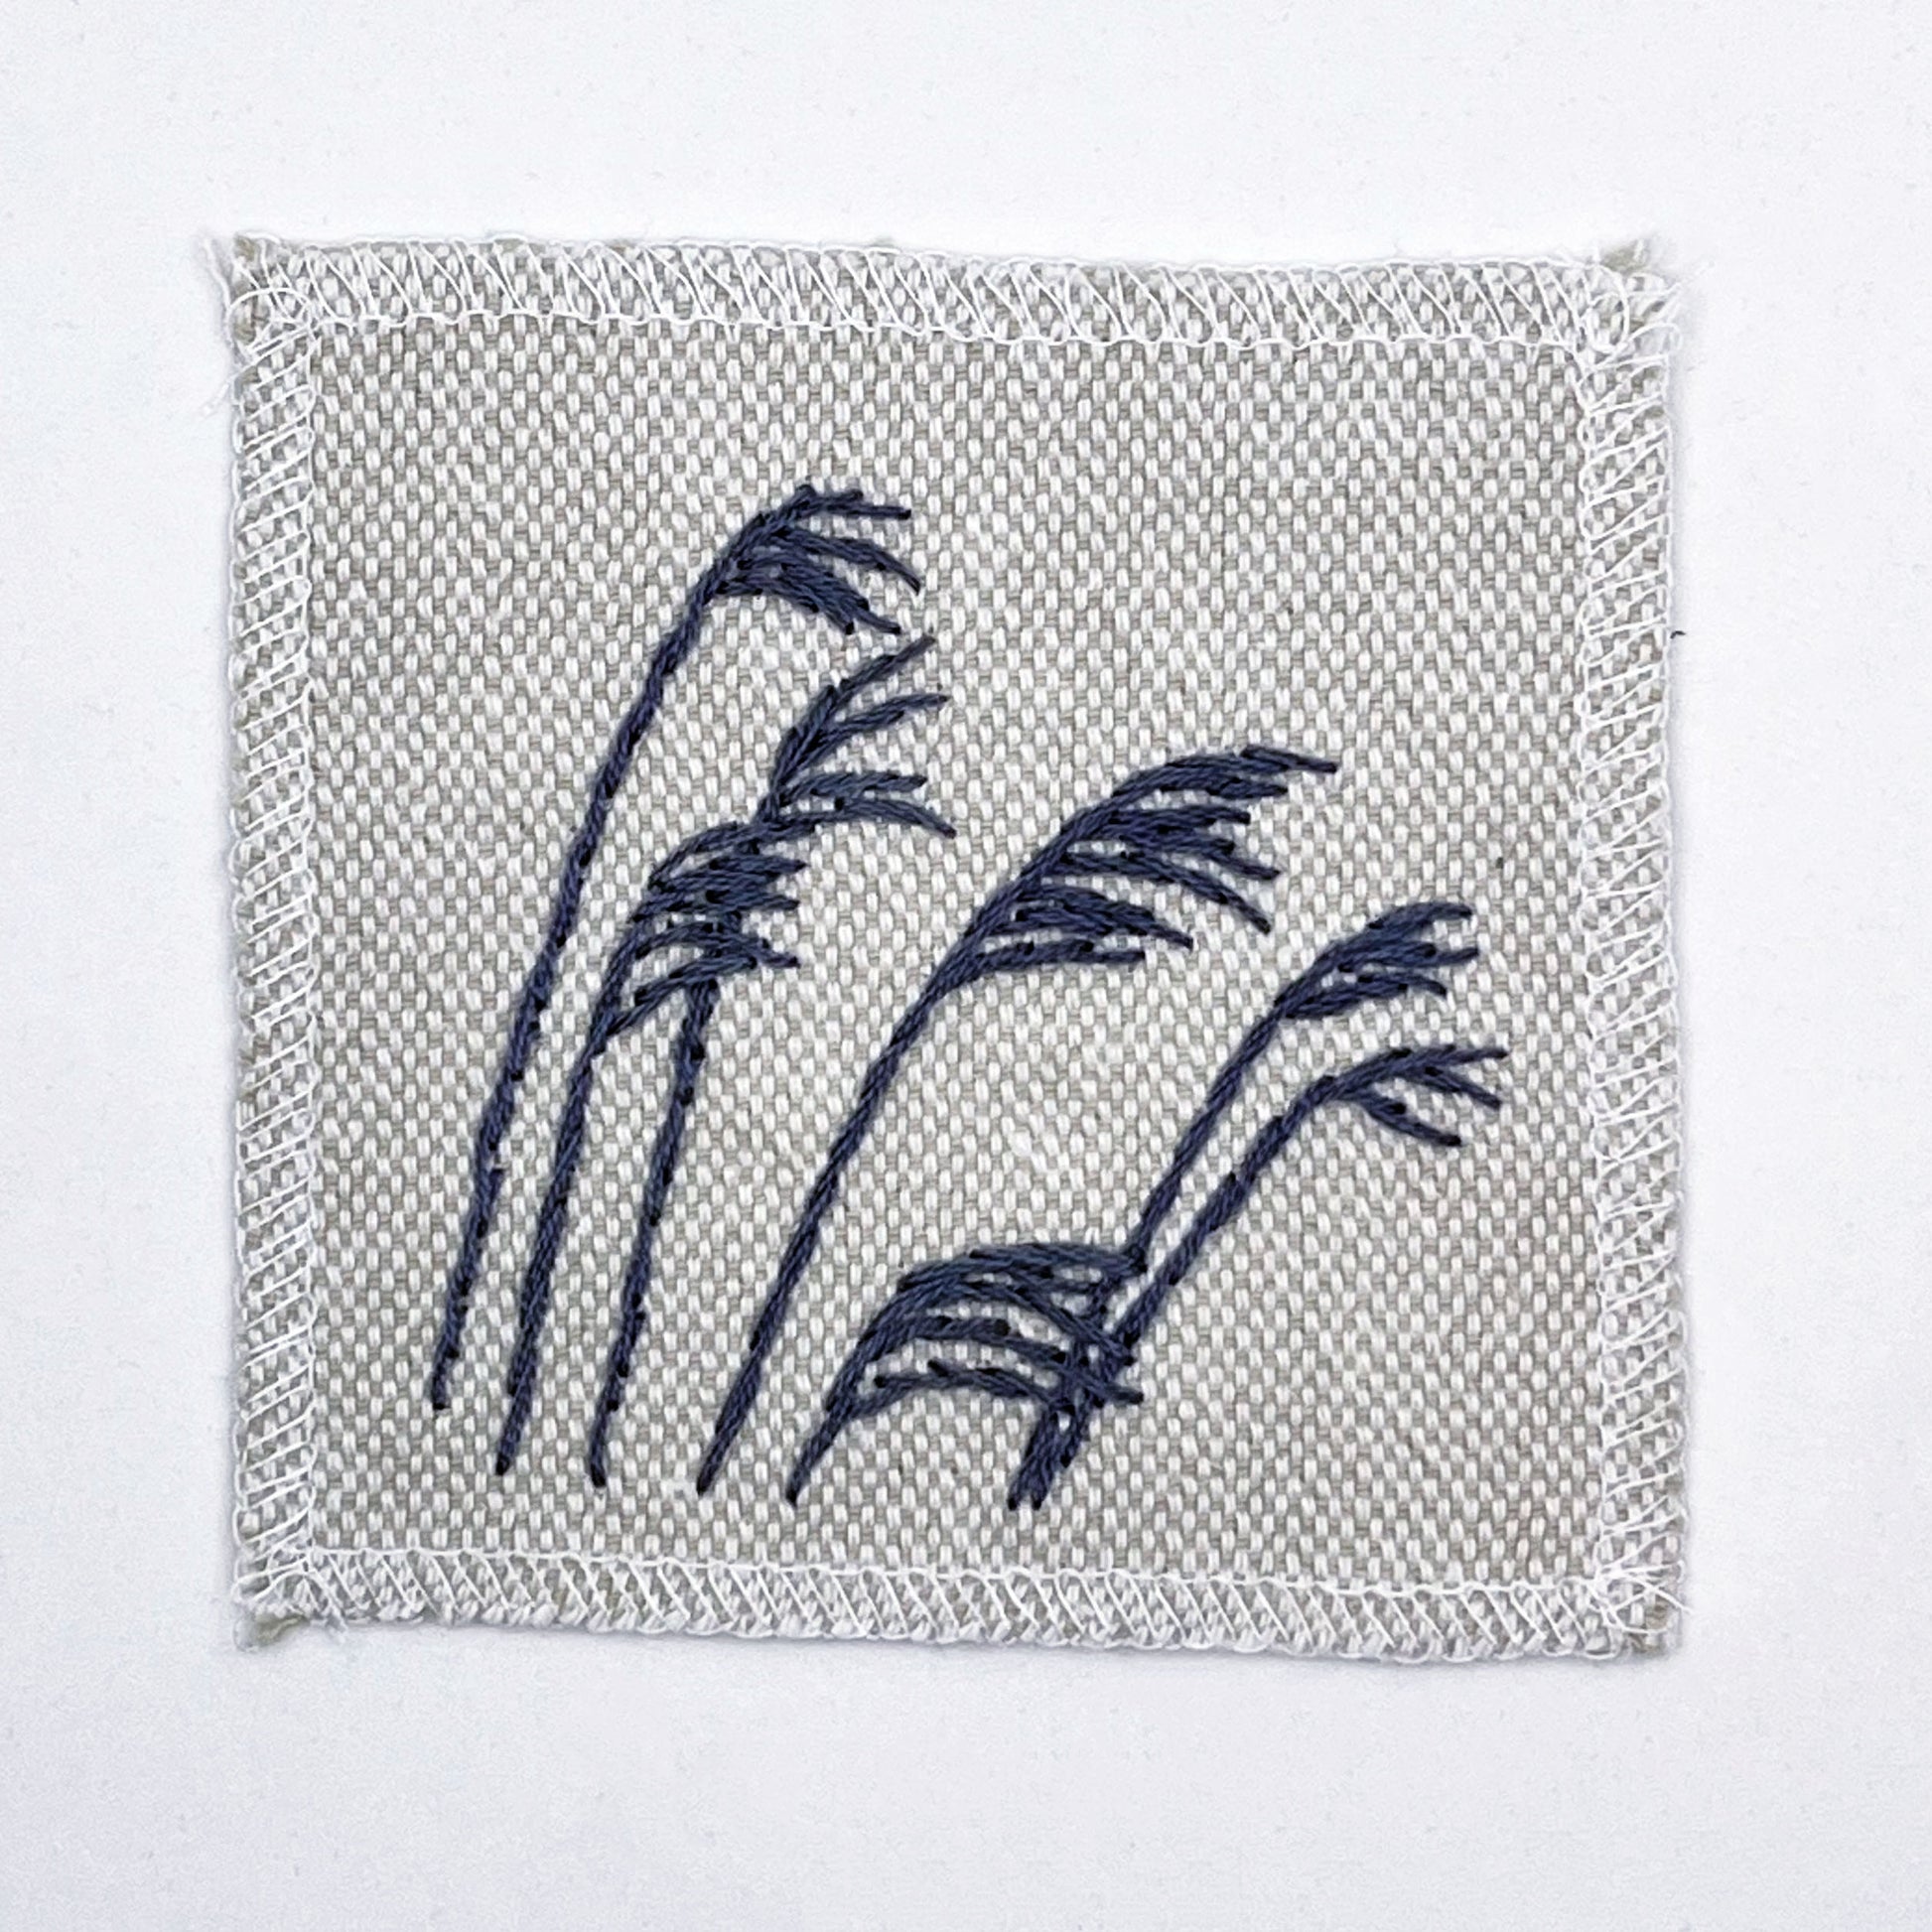 a natural colored square patch with stalks of wild grass stitched in grey thread with a stem stitch, on a white background